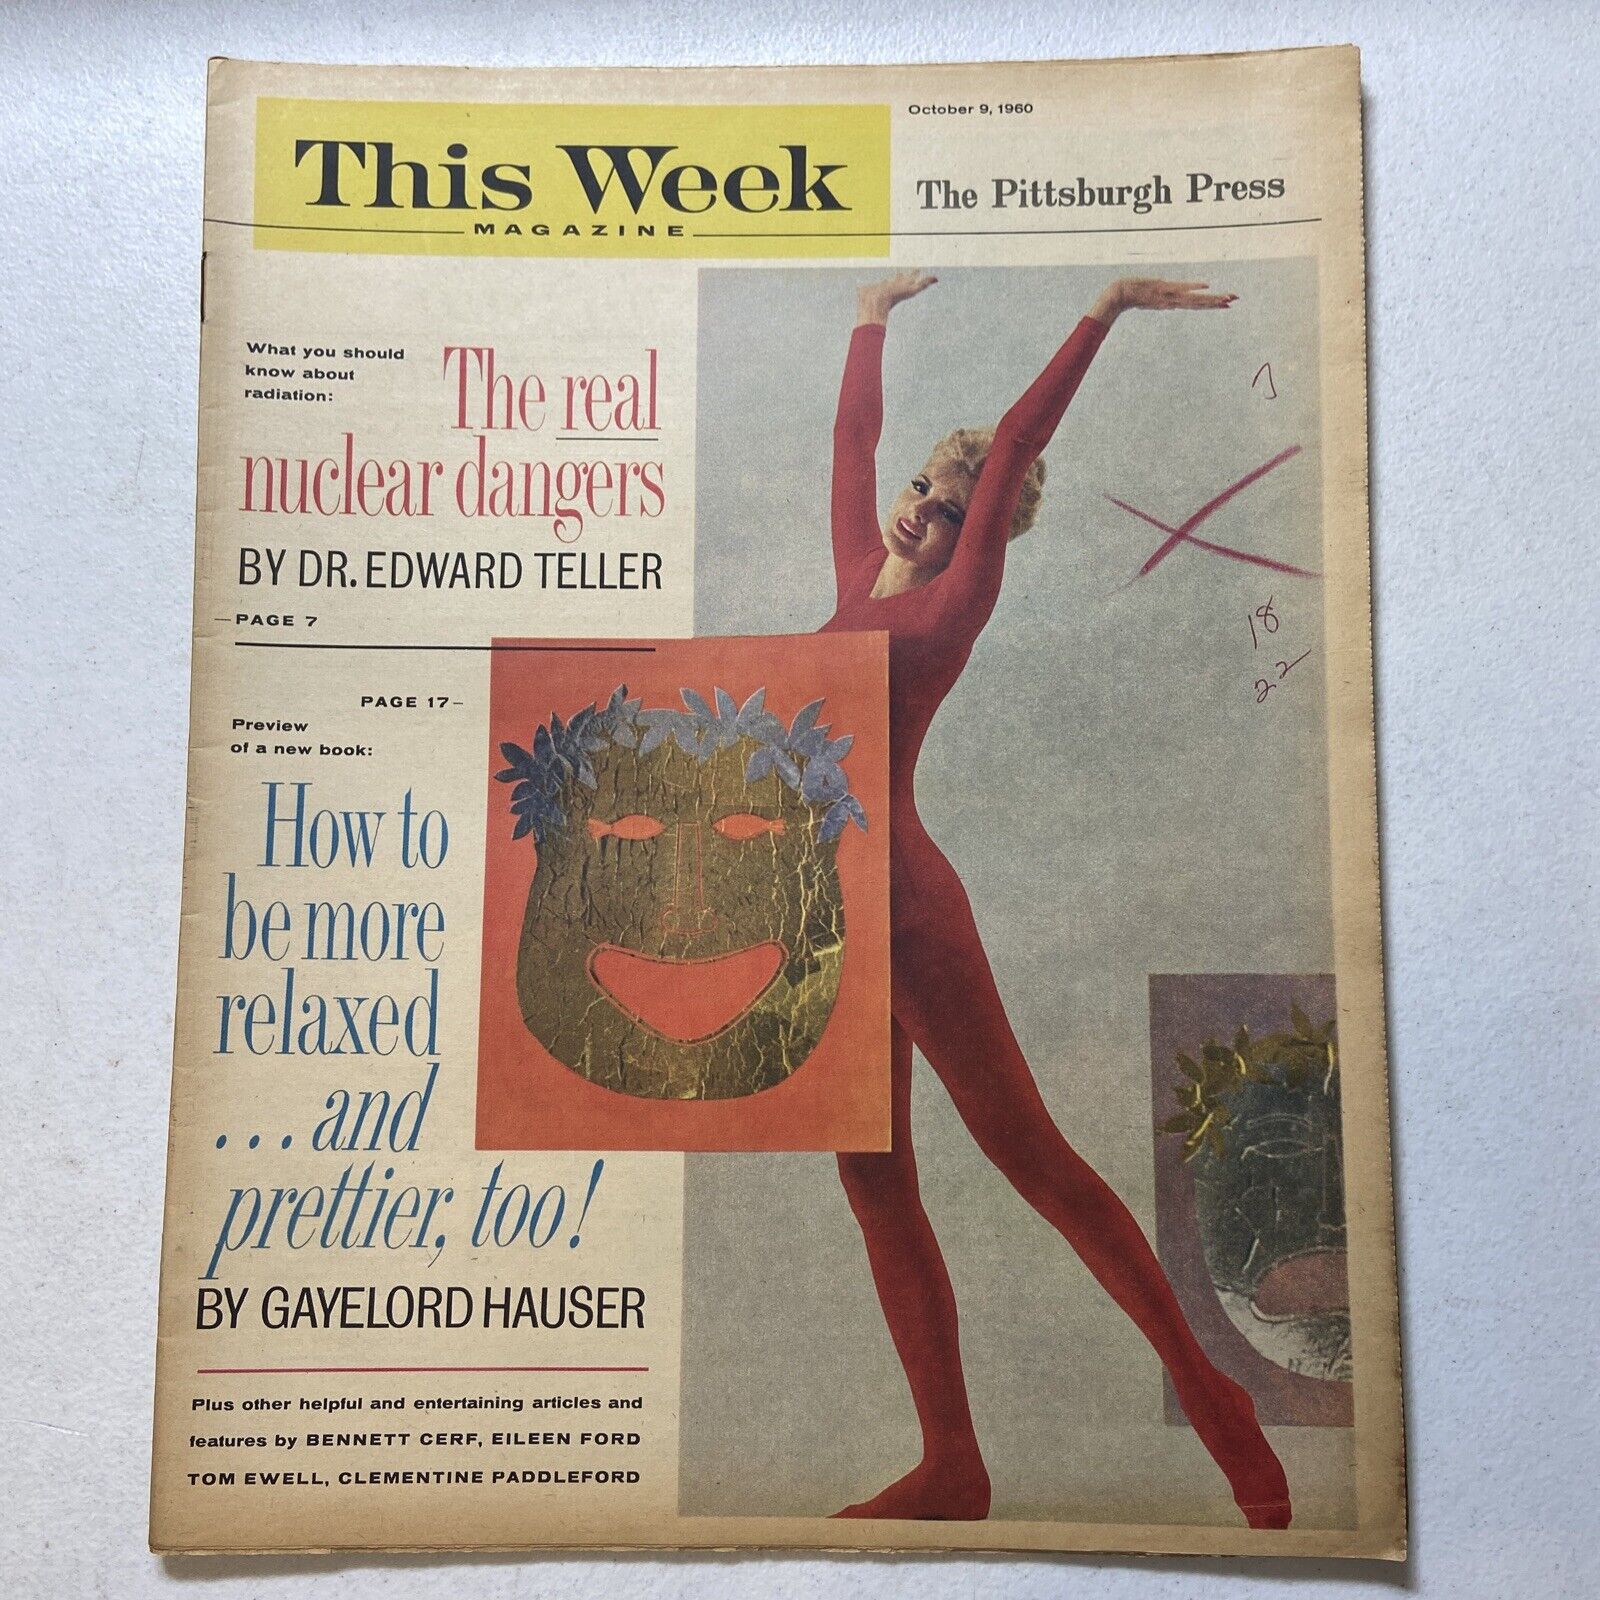 THIS WEEK Magazine October 9, 1960 - Dr. Edward Teller Nuclear Radiation Dangers